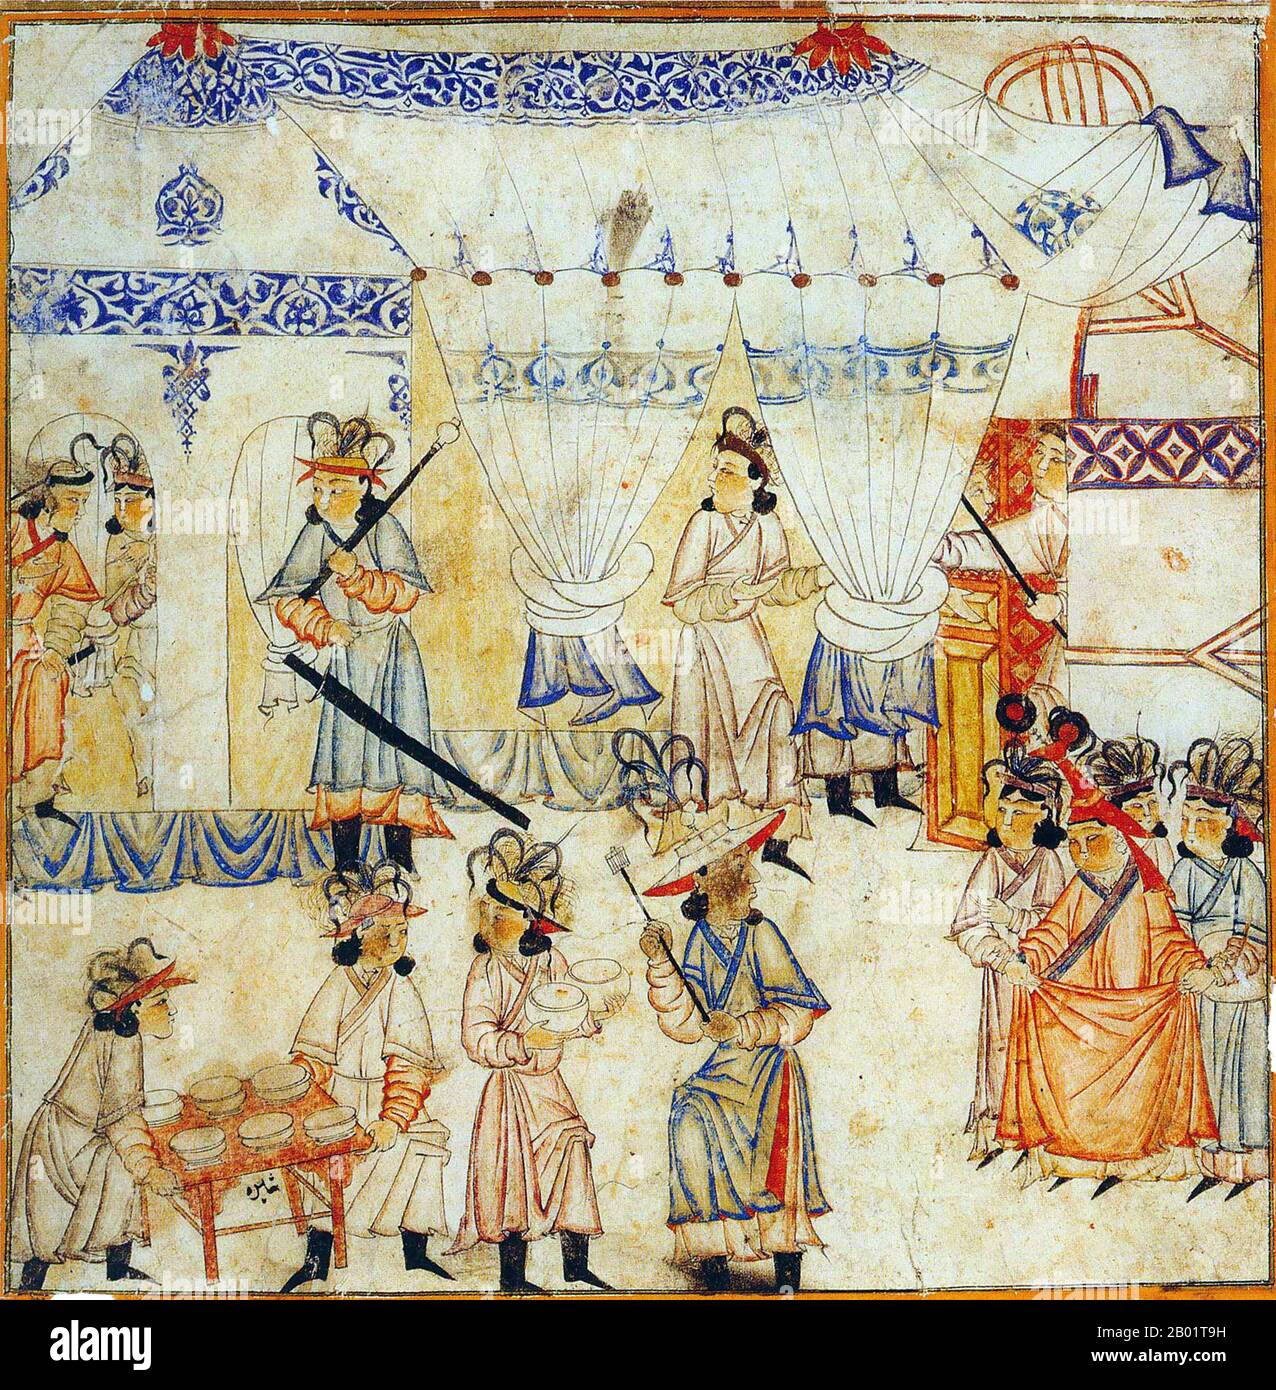 Iran/Persia: Preparations for a festival. Watercolour painting by Rashid al-Din, Jami al-Tawarikh, c. 1305 CE.  The Jāmiʿ al-tawārīkh ('Compendium of Chronicles') or Universal History is an Iranian work of literature and history written by Rashid-al-Din Hamadani at the start of the 14th century. Stock Photo